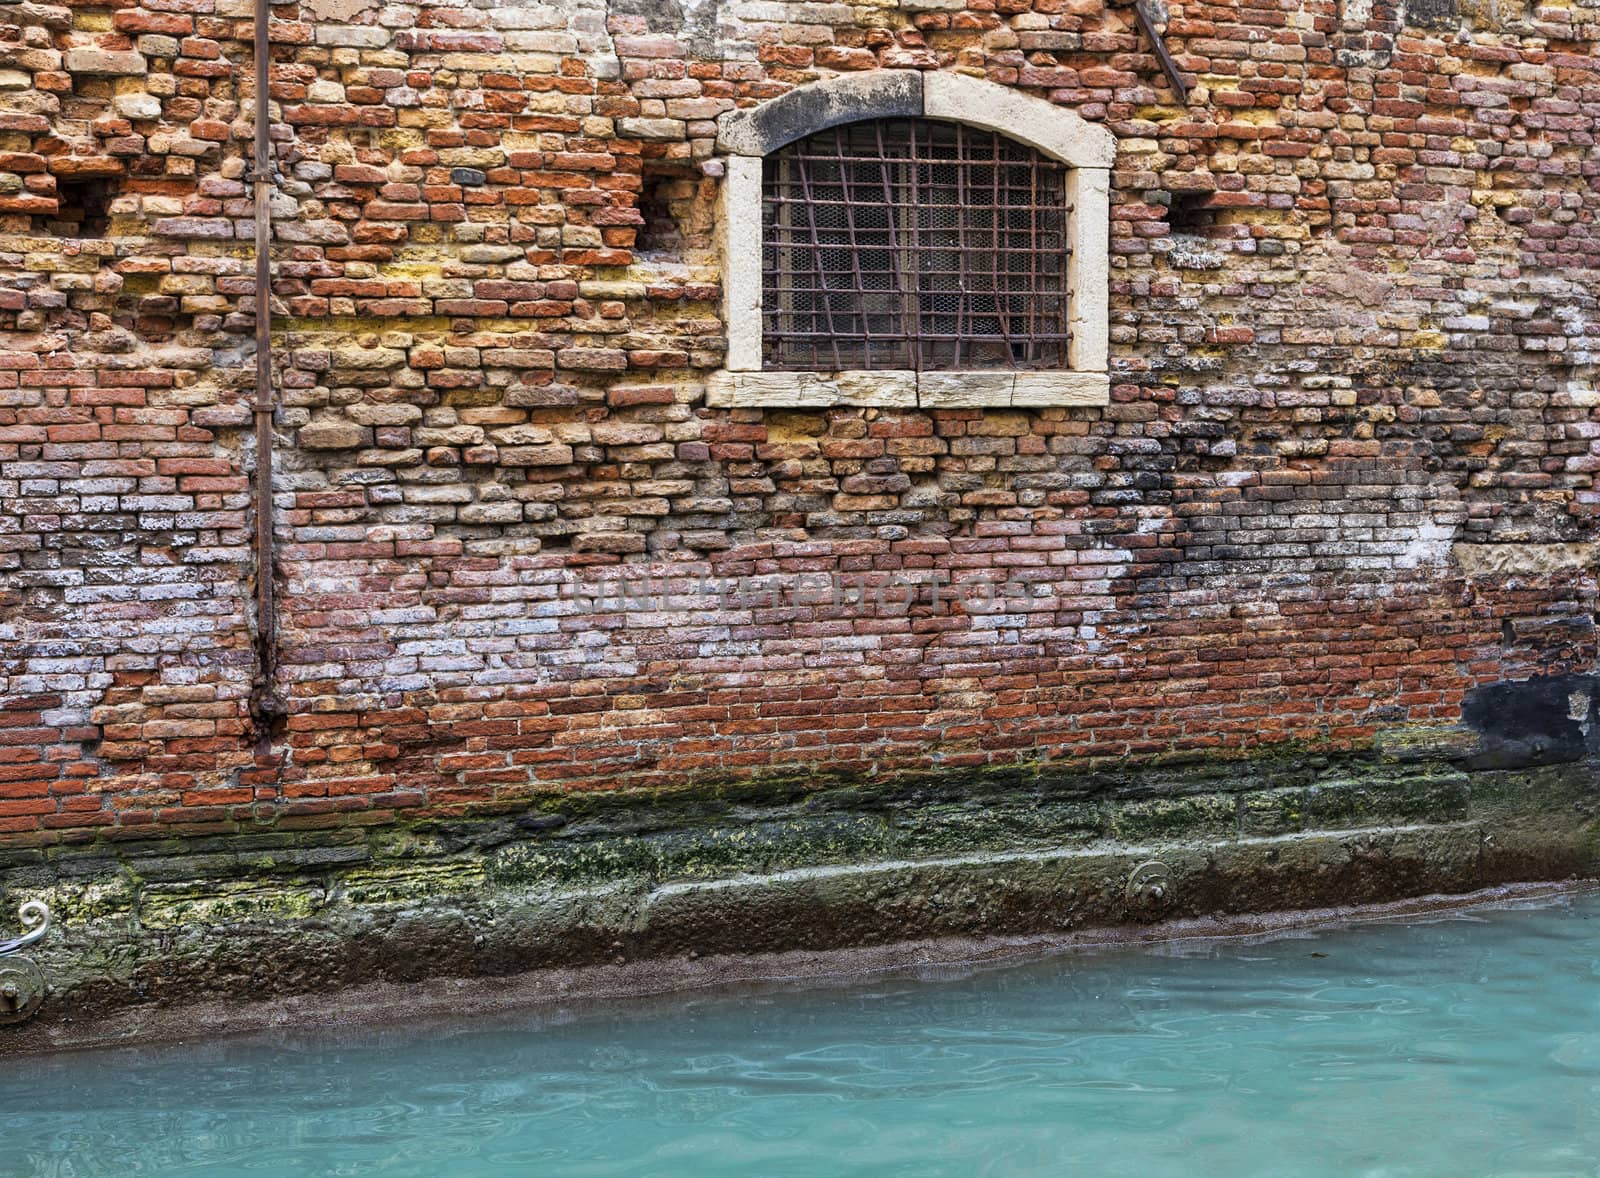 Detail of a brick wall of a Venetian house near a specific canal.